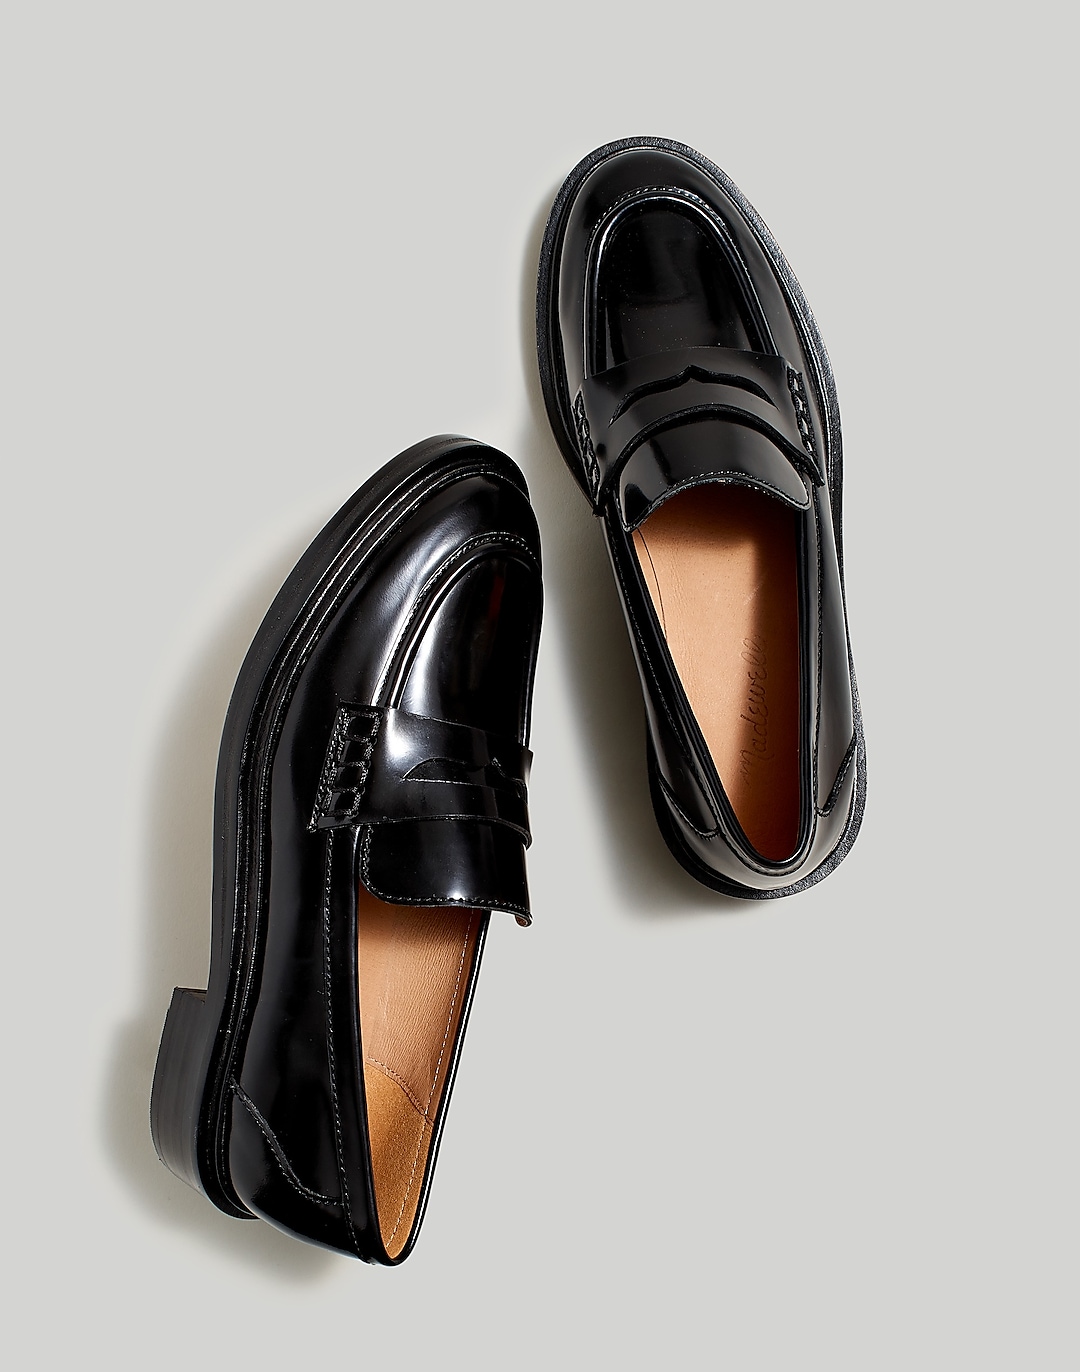 The Vernon Loafer | Madewell